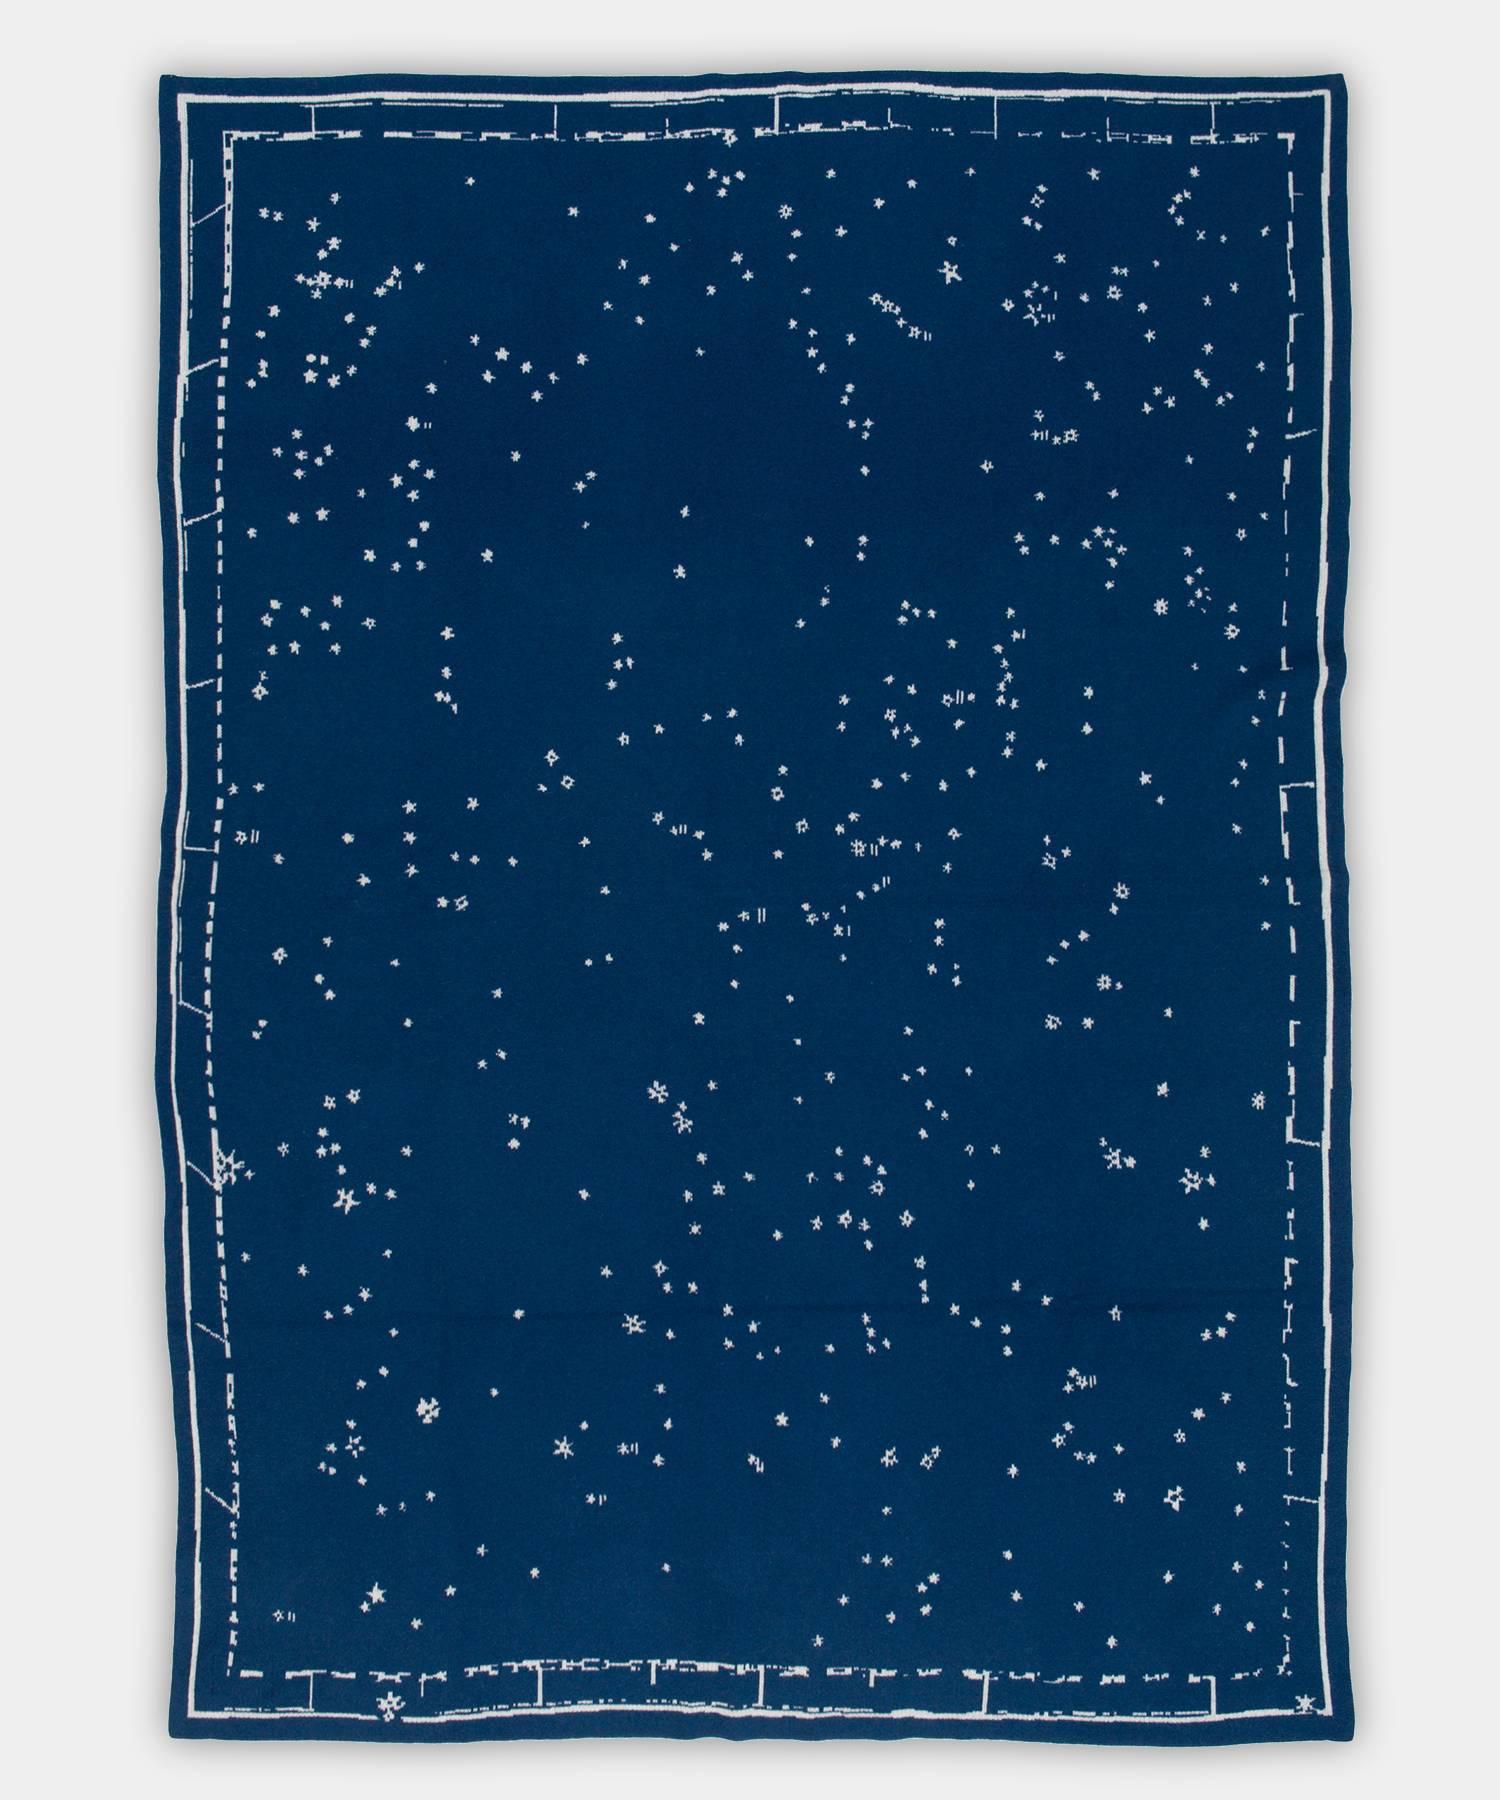 Mongolian Constellation Blanket by Saved, New York